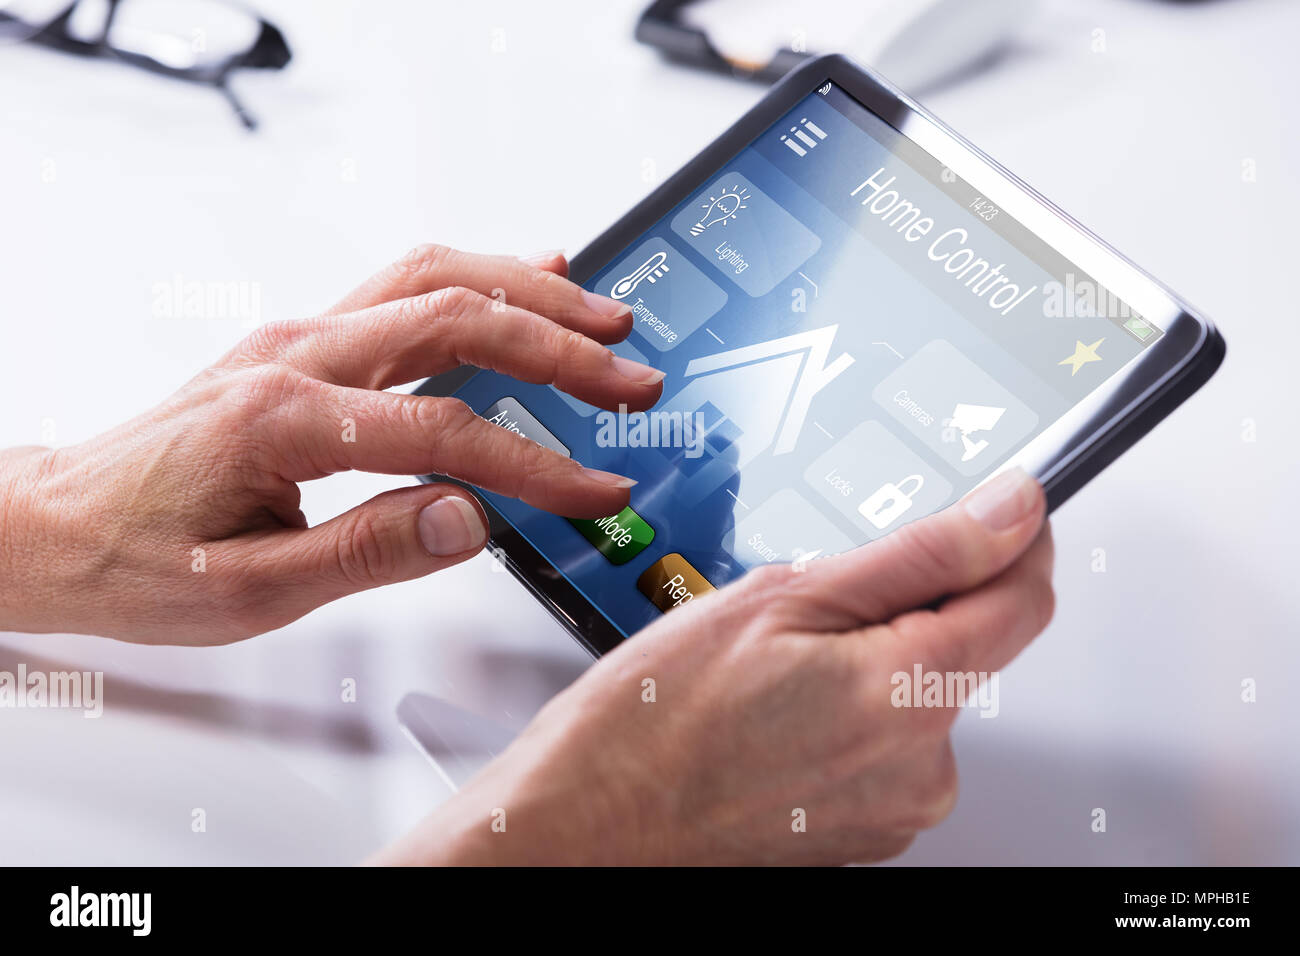 Close-up Of A Person's Hand Using Home Control System On Digital Tablet Stock Photo